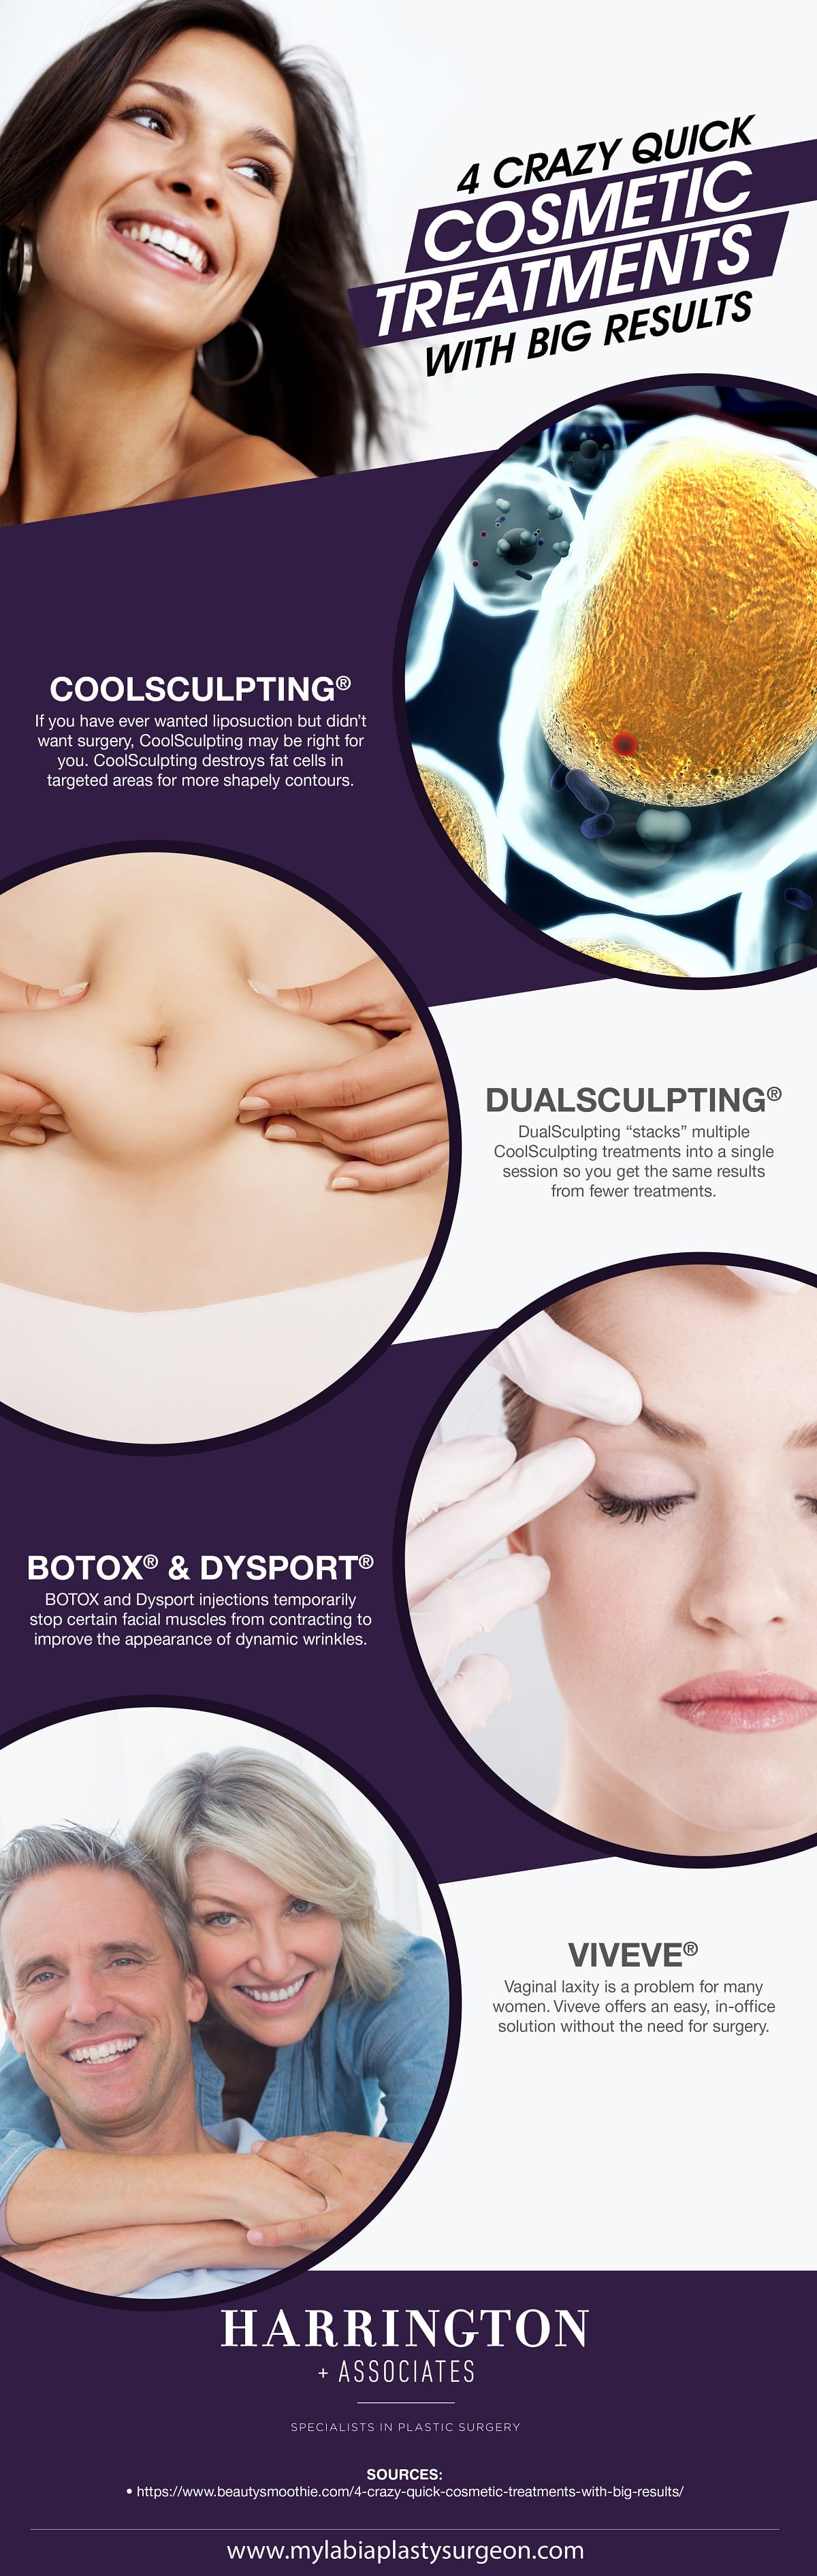 4 Crazy Quick Cosmetic Treatments with Big Results [Infographic] img 1